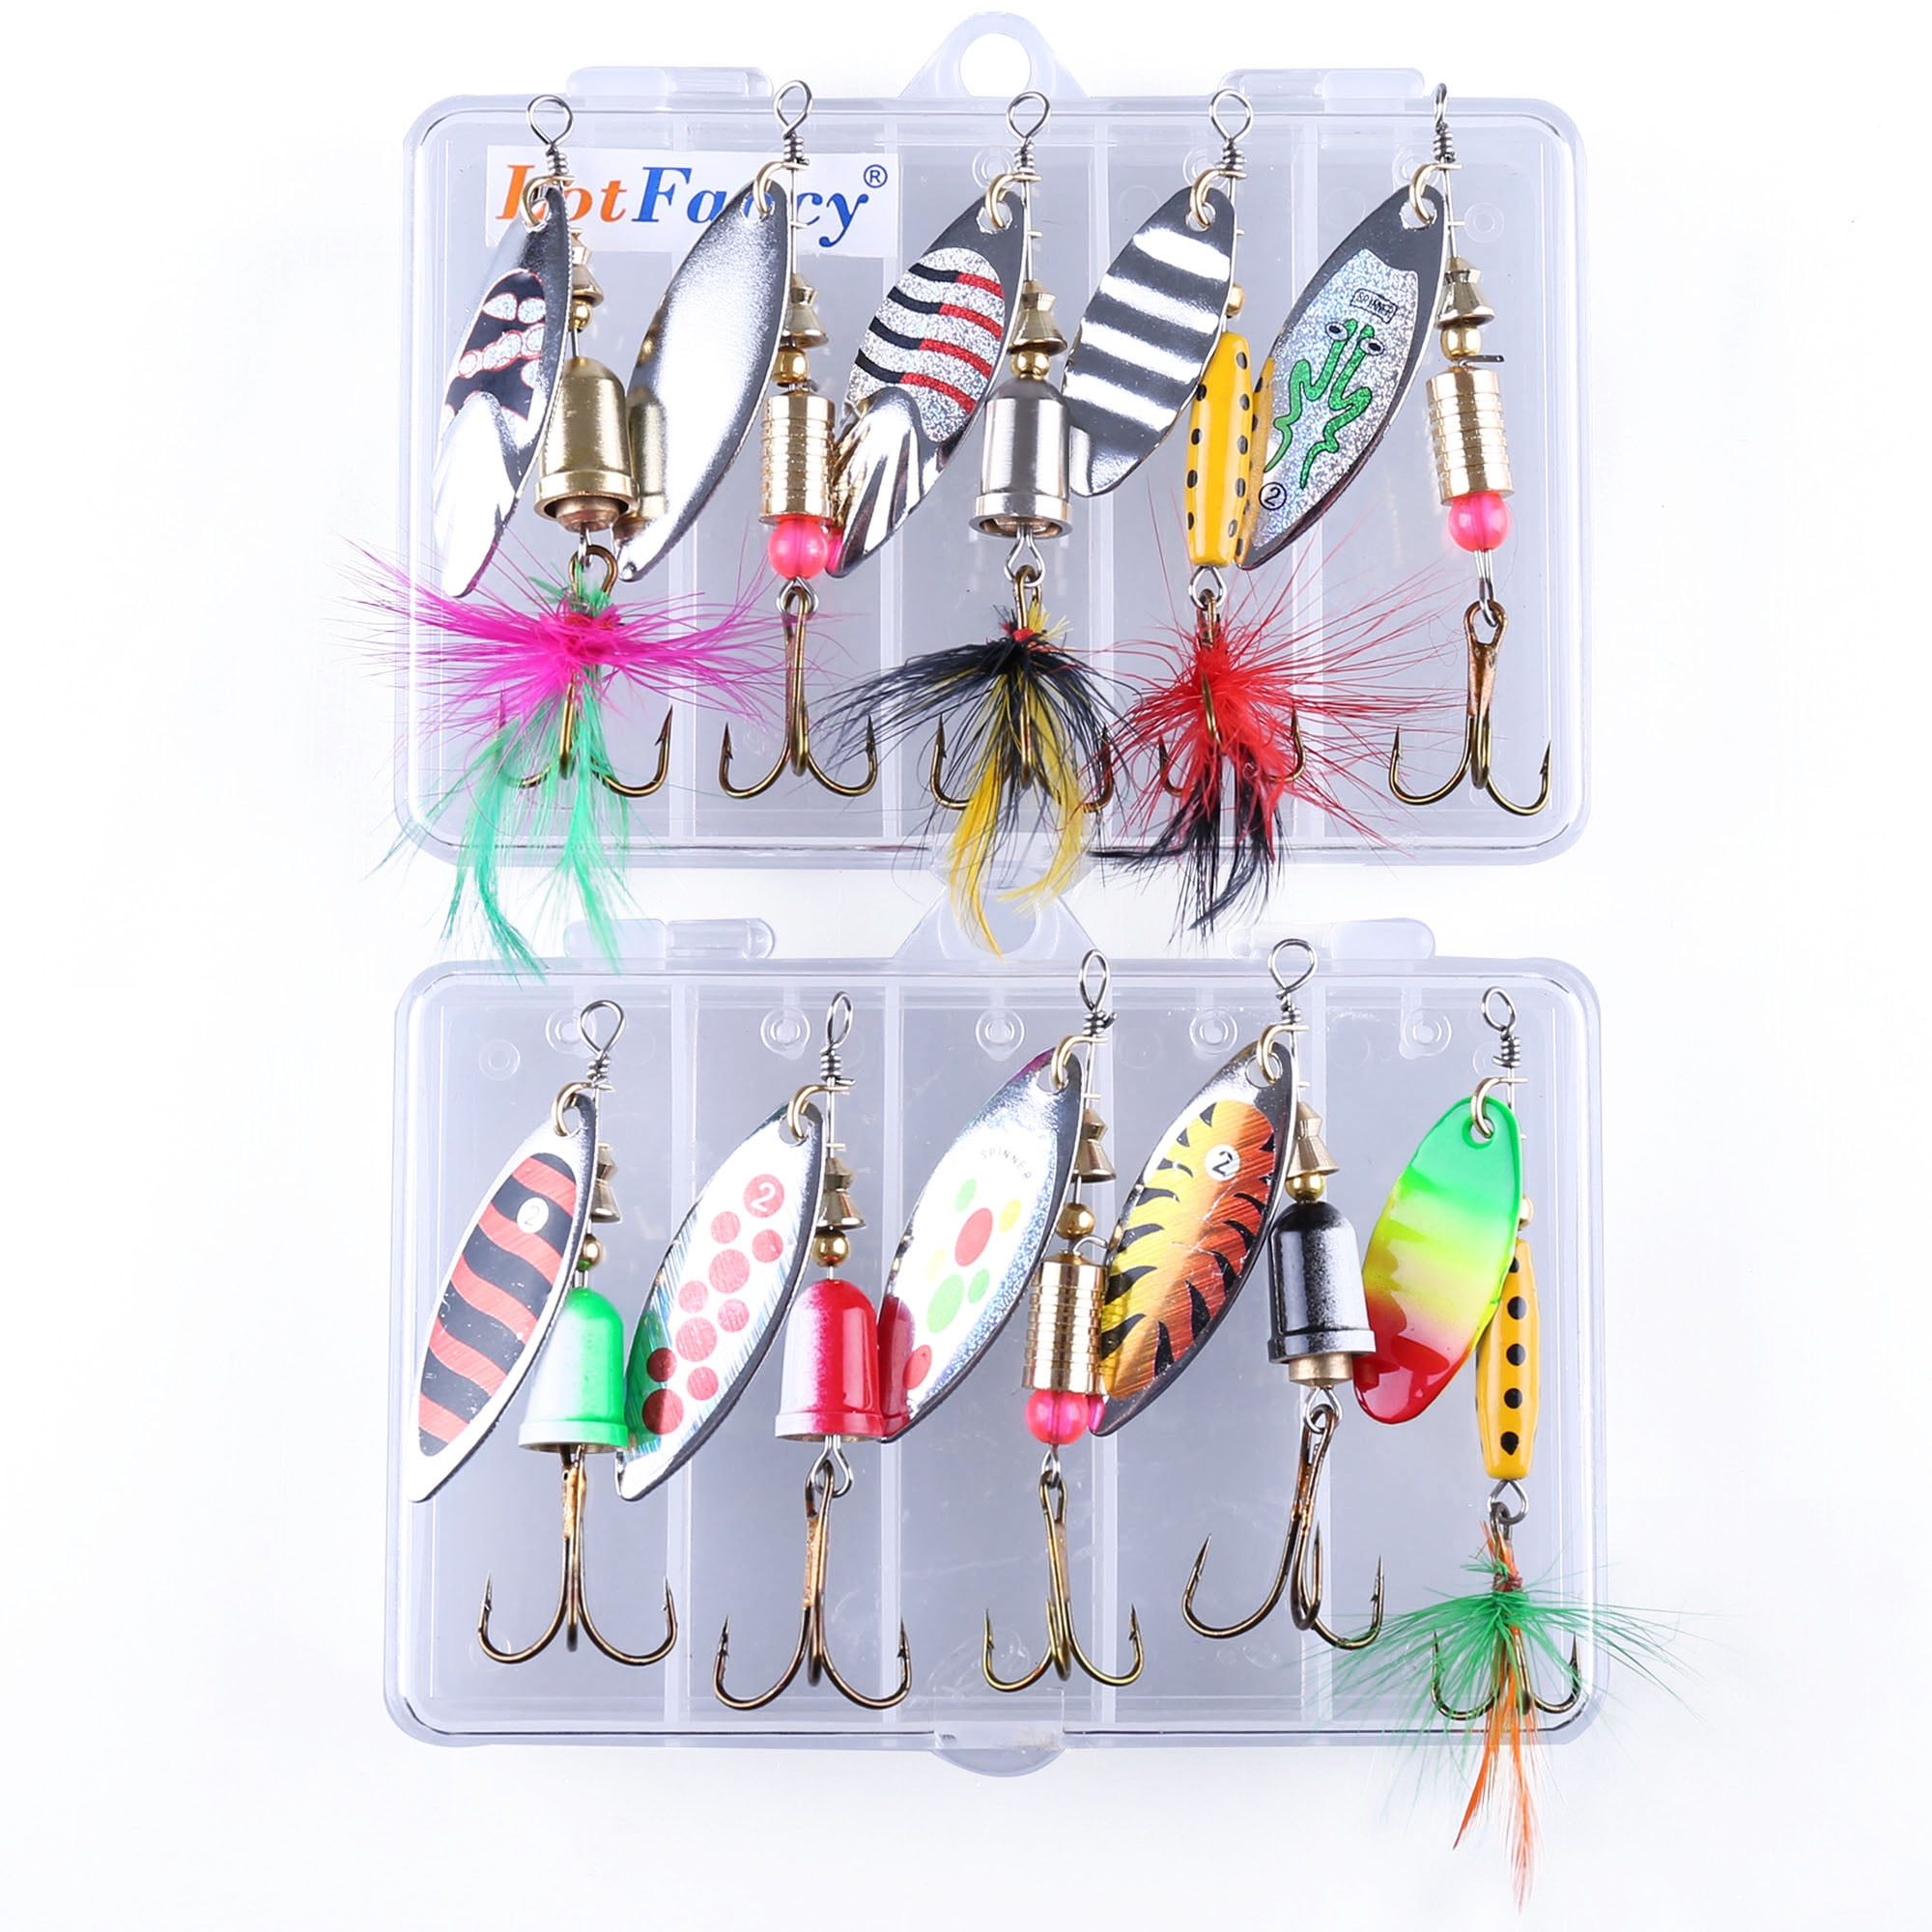  10pcs Fishing Lure Spinnerbait, Bass Trout Salmon Hard Metal  Spinner Baits Kit with 2 Tackle Boxes by Tbuymax : Sports & Outdoors